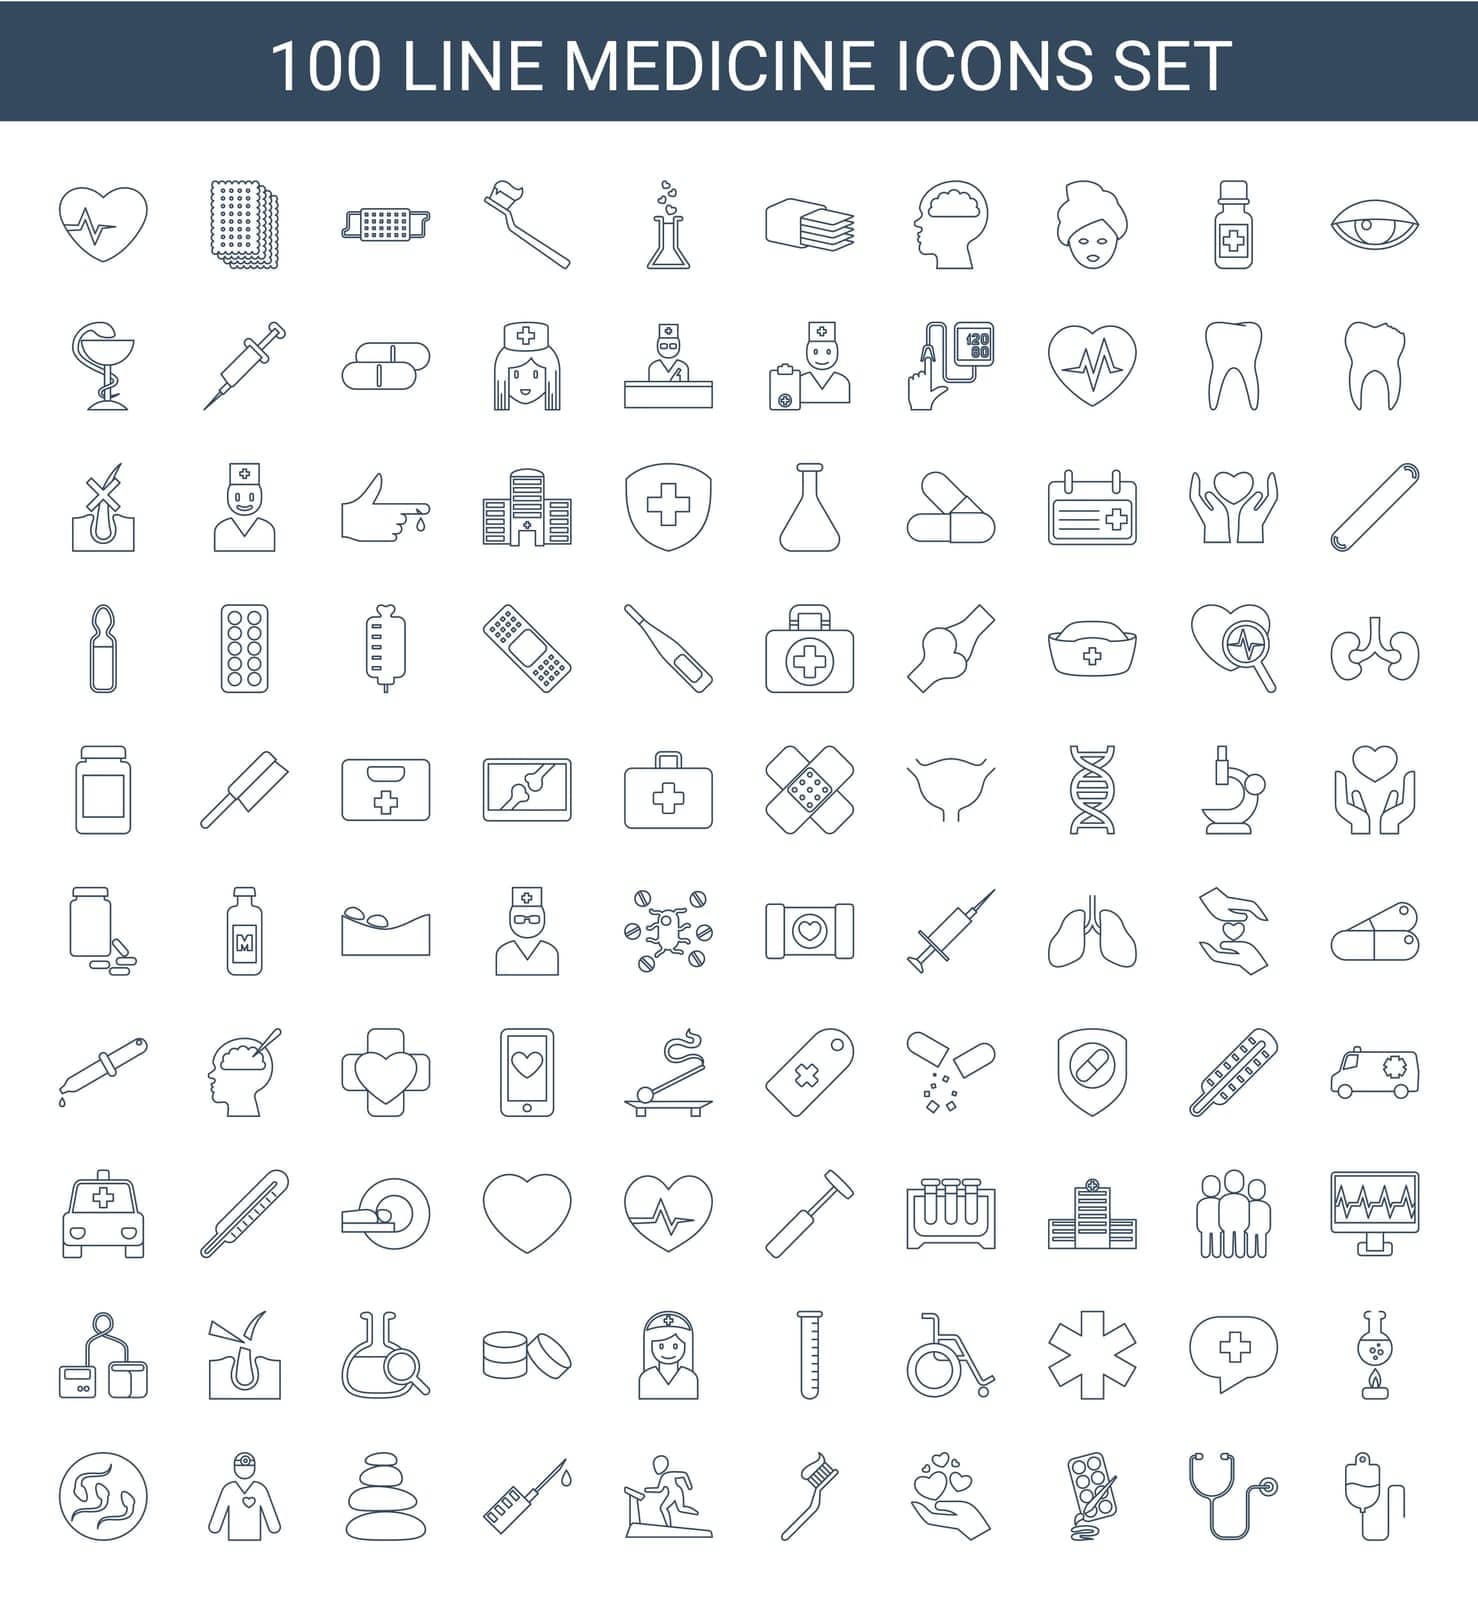 drop,medical,heartbeat,icon,skin,toothbrush,holding,tablet,hair,search,nurse,vector,stethoscope,shave,hand,set,test,spa,in,wheel,chair,cross,medicine,sperm,counter,pressure,heart,tool,doctor,rash,blod,with,tube,paints,reflector,stones,injection,treadmill by ogqcorp